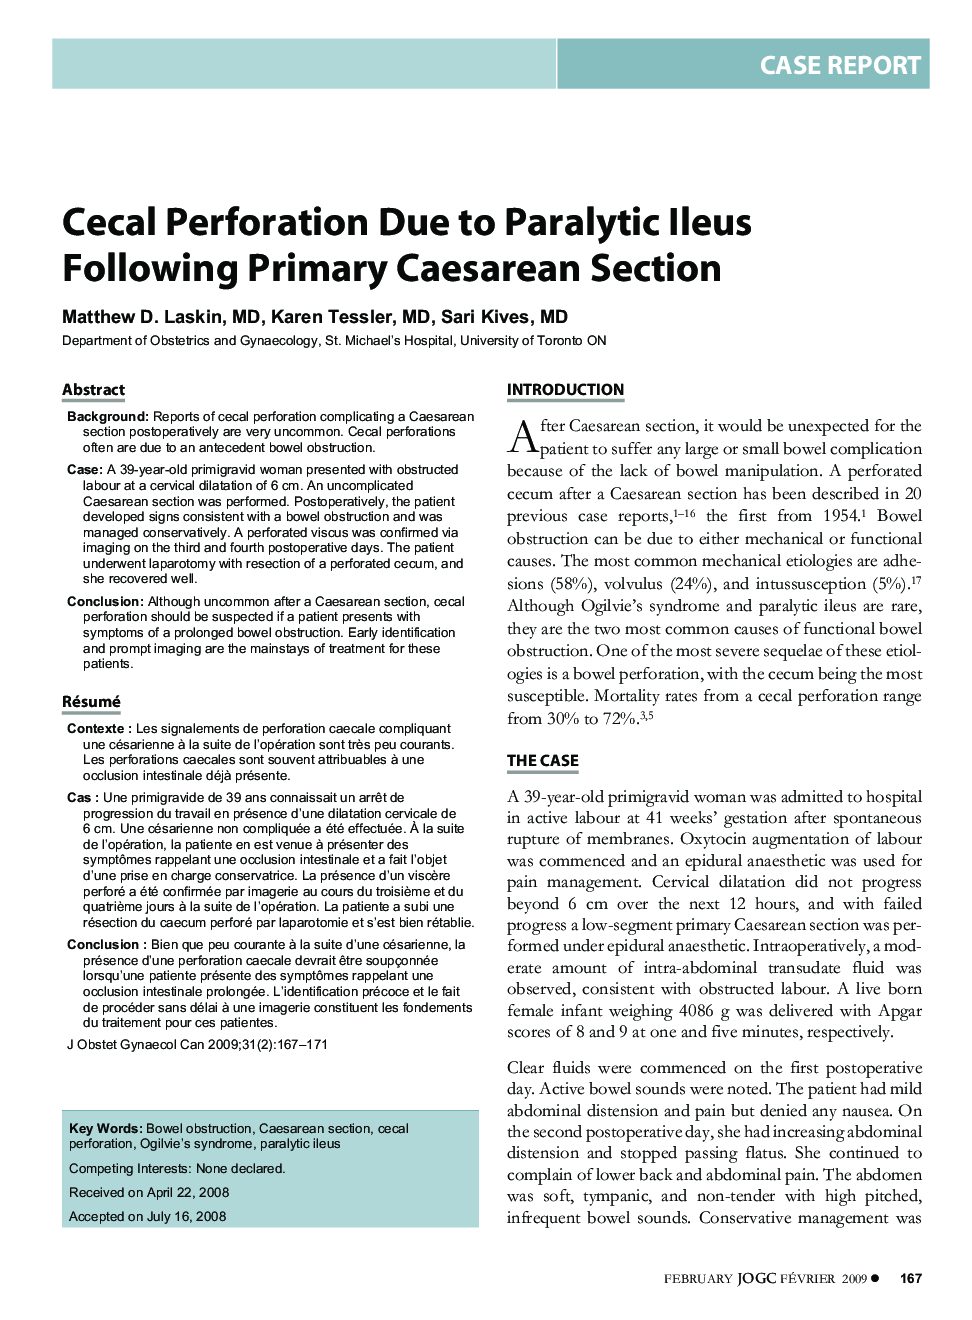 Cecal Perforation Due to Paralytic Ileus Following Primary Caesarean Section